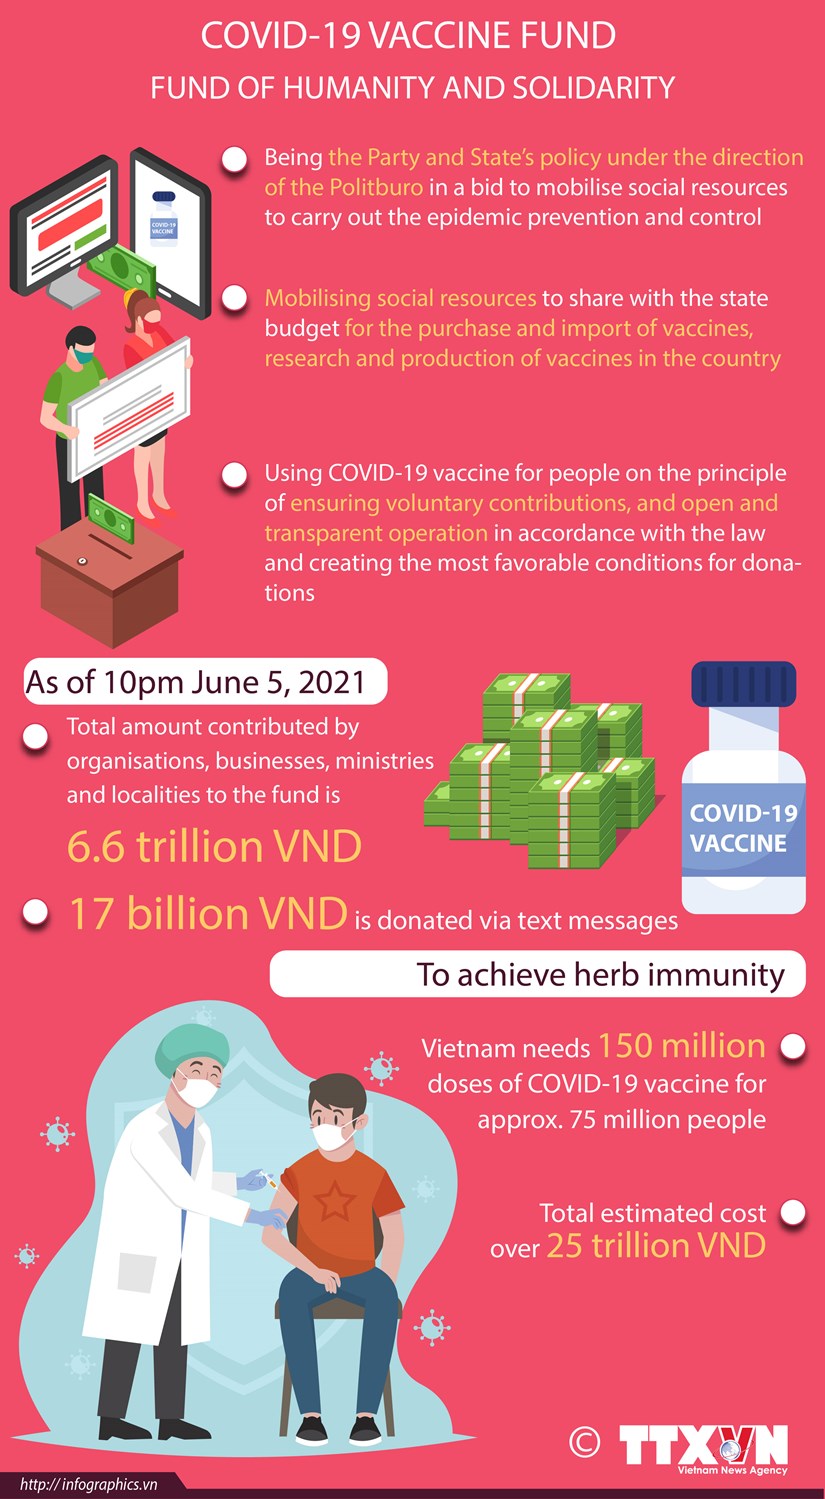 National COVID-19 vaccine fund launched hinh anh 1